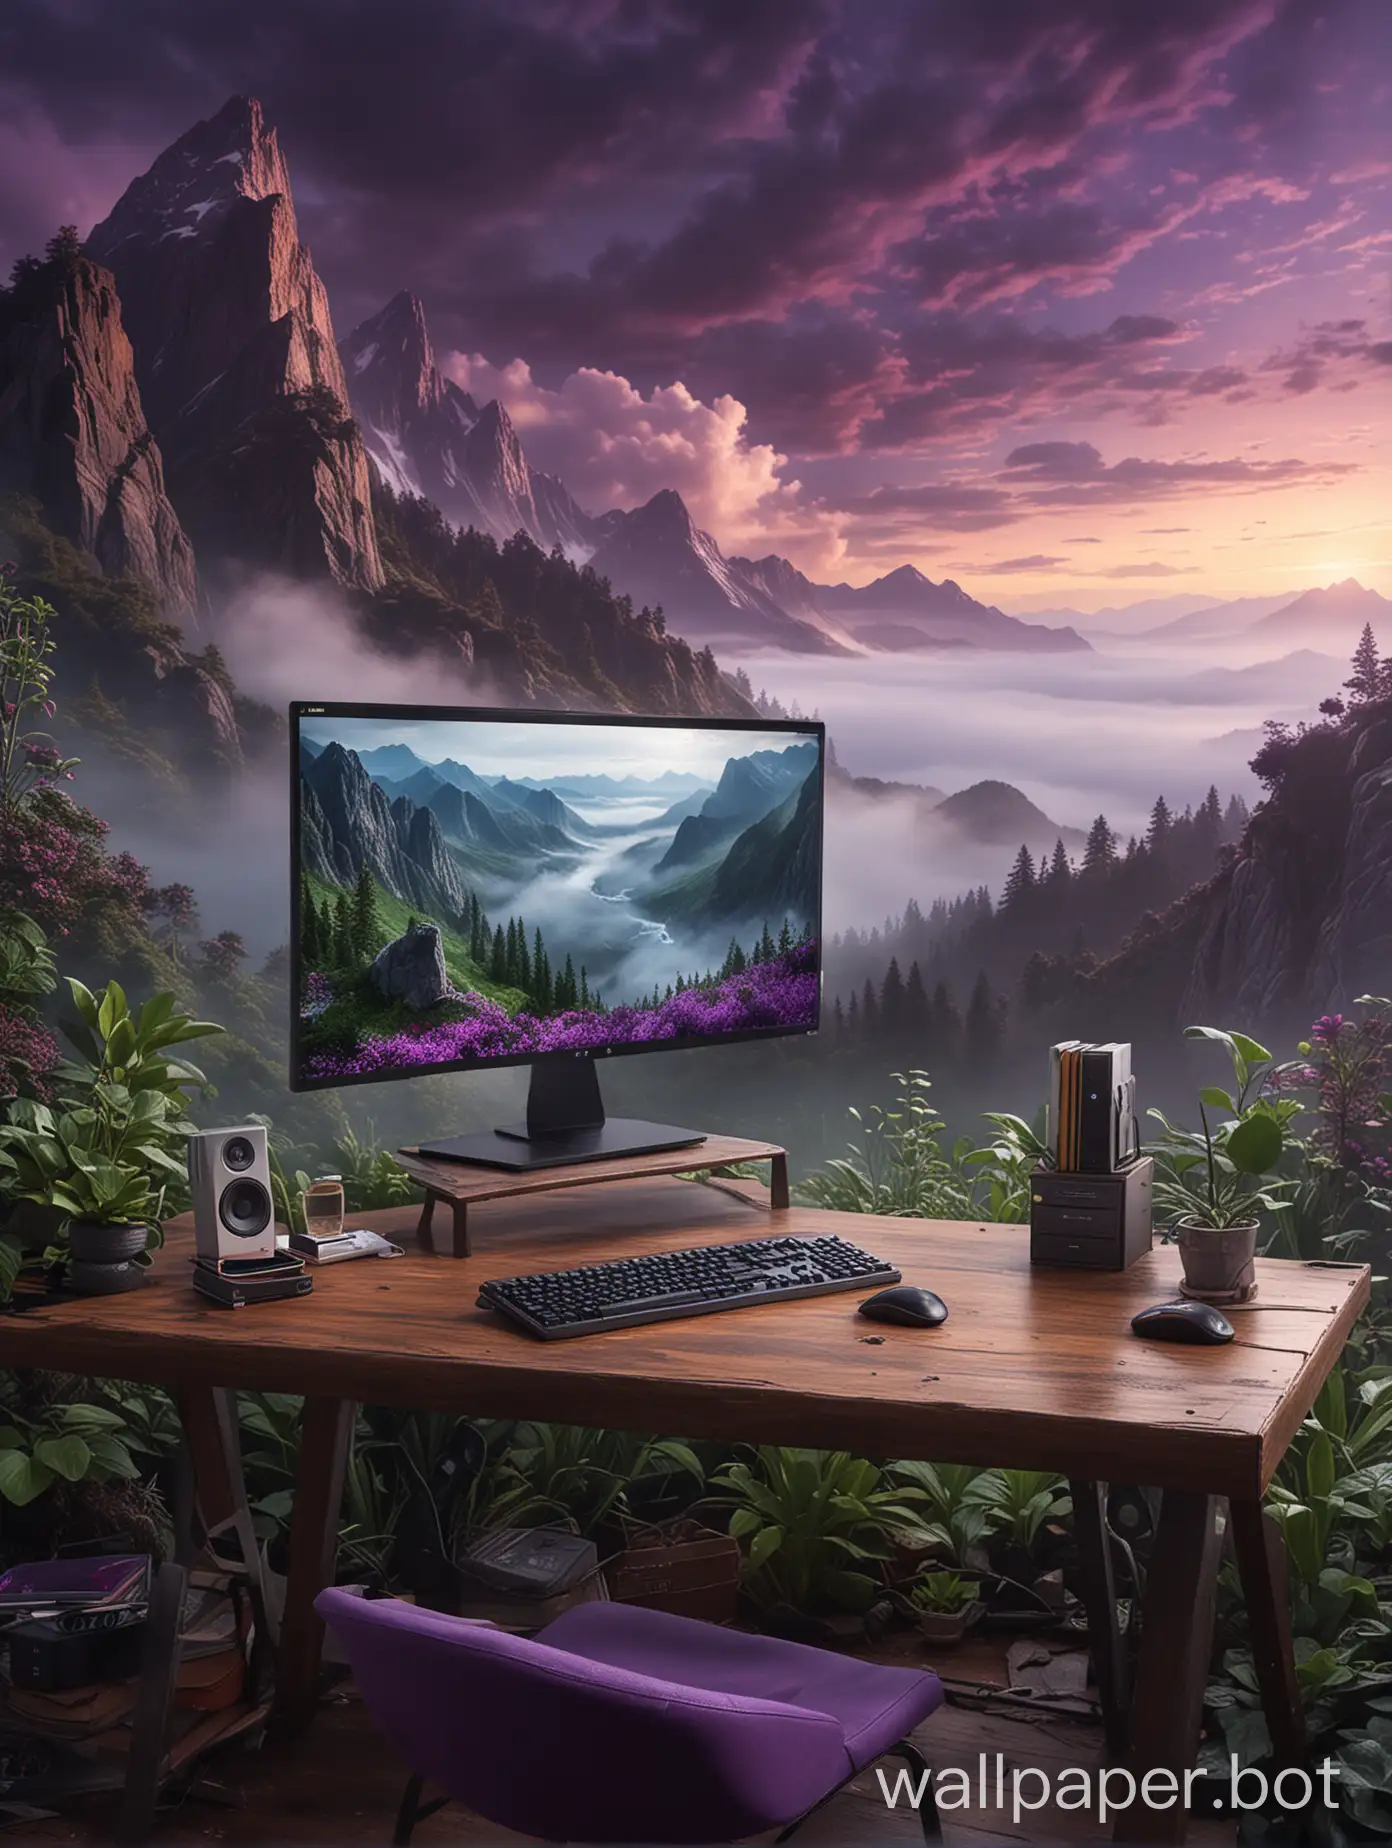 Create a highly realistic 4K 16:9 wallpaper using vivid, realistic HDR Dolby Vision colors. The scene should depict a computer desk with RGB lights in purple and green, situated atop a mountain enveloped in fog at night. Ensure the lighting is soft to evoke a sense of calmness, emptiness, and solitude. No people should be included in the image. The overall composition should exude a serene and tranquil atmosphere.